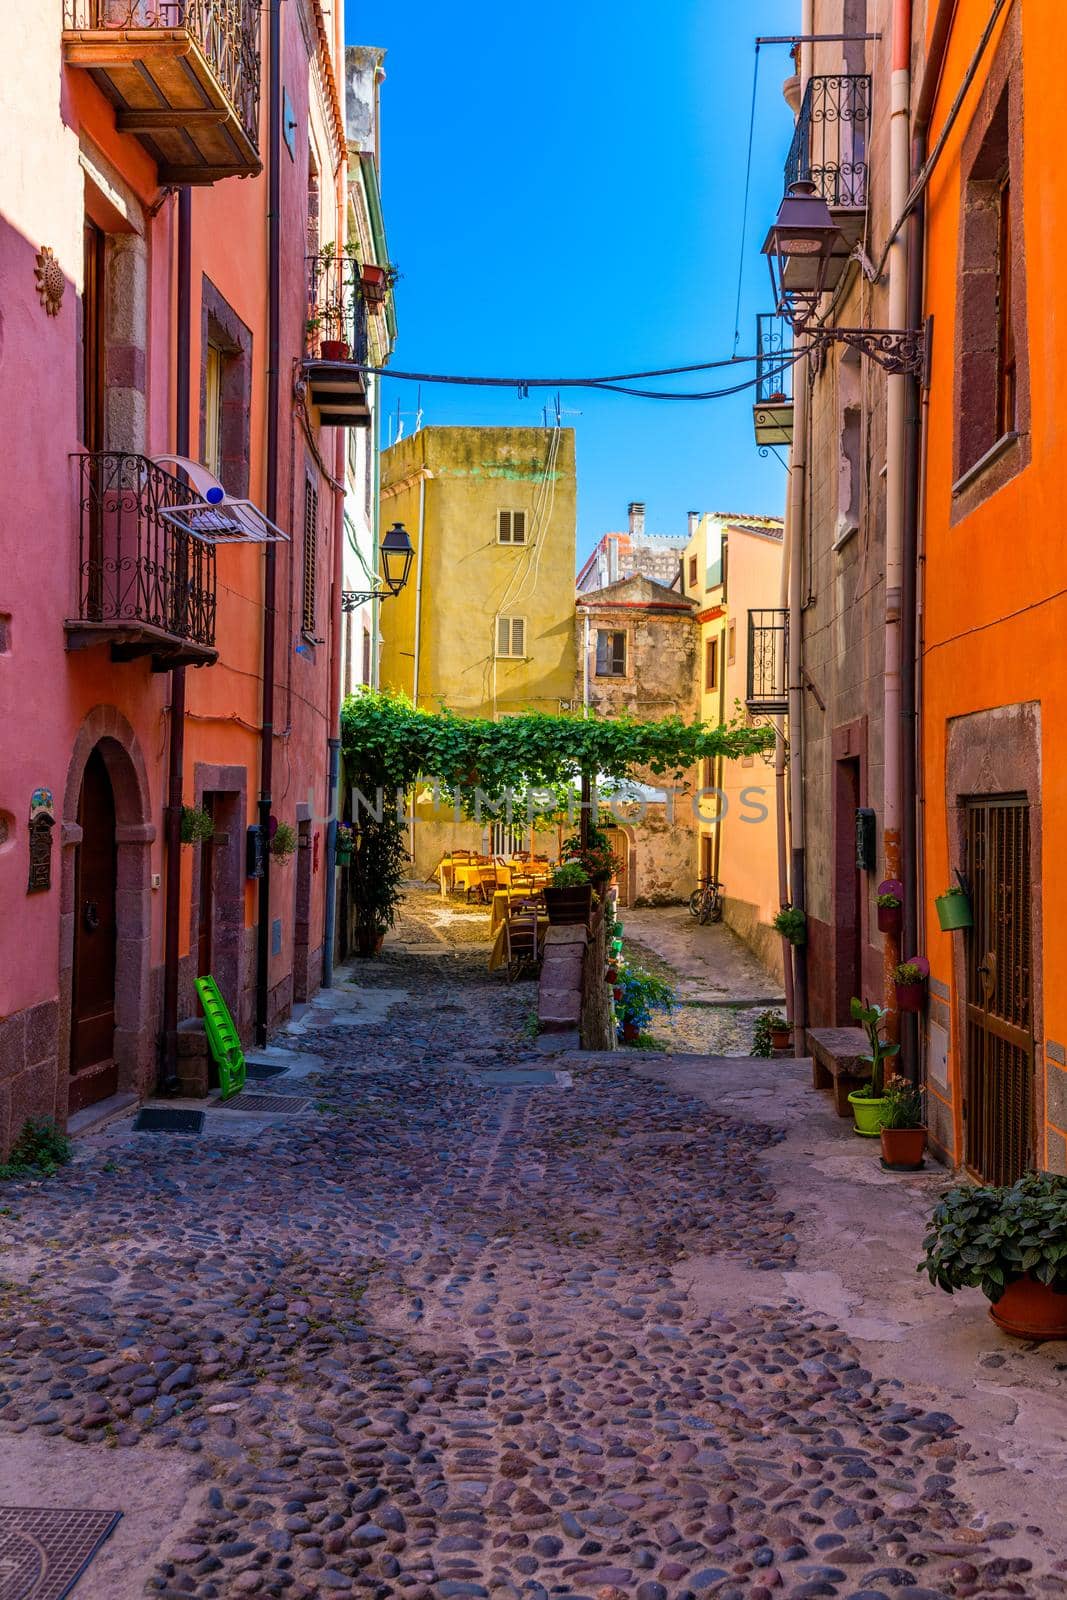 Street view of the beautiful village of Bosa with colored houses and a medieval castle. Bosa is located in the north-wesh of Sardinia, Italy. Street view of colorful houses in Bosa village, Sardegna.